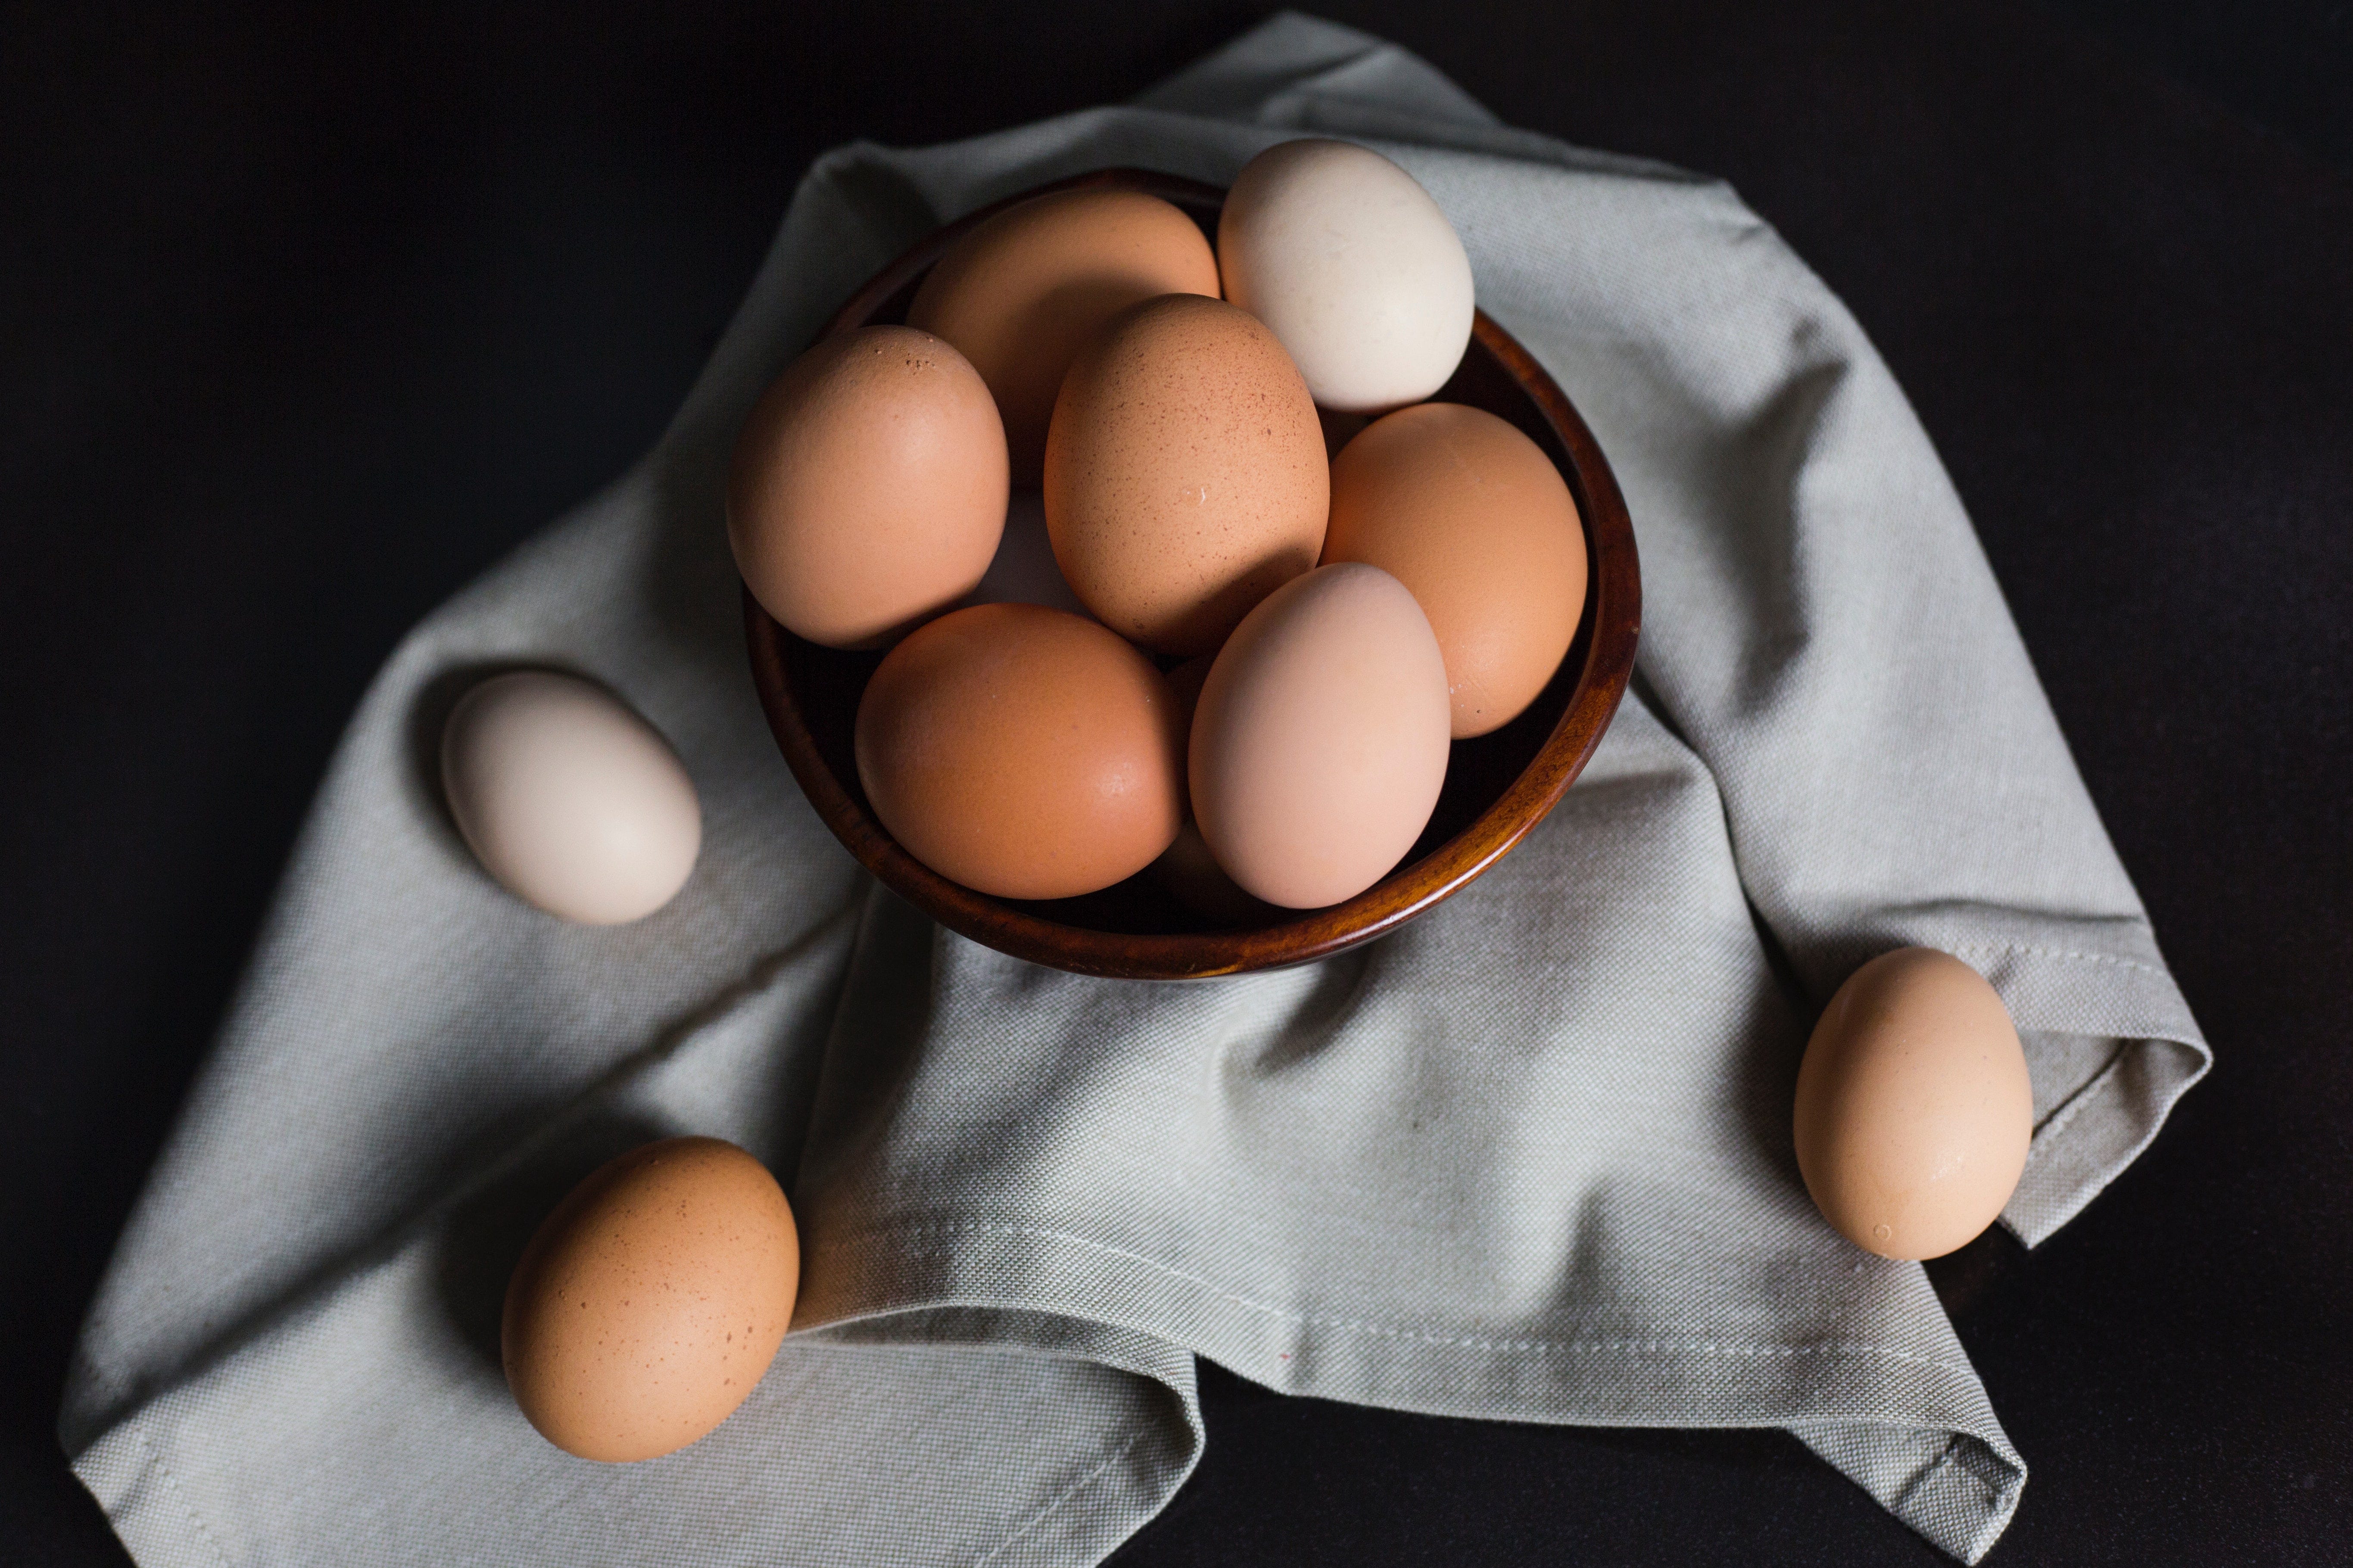 Which Is Better Value: Buying Medium Eggs or Large Eggs? - Maths Careers